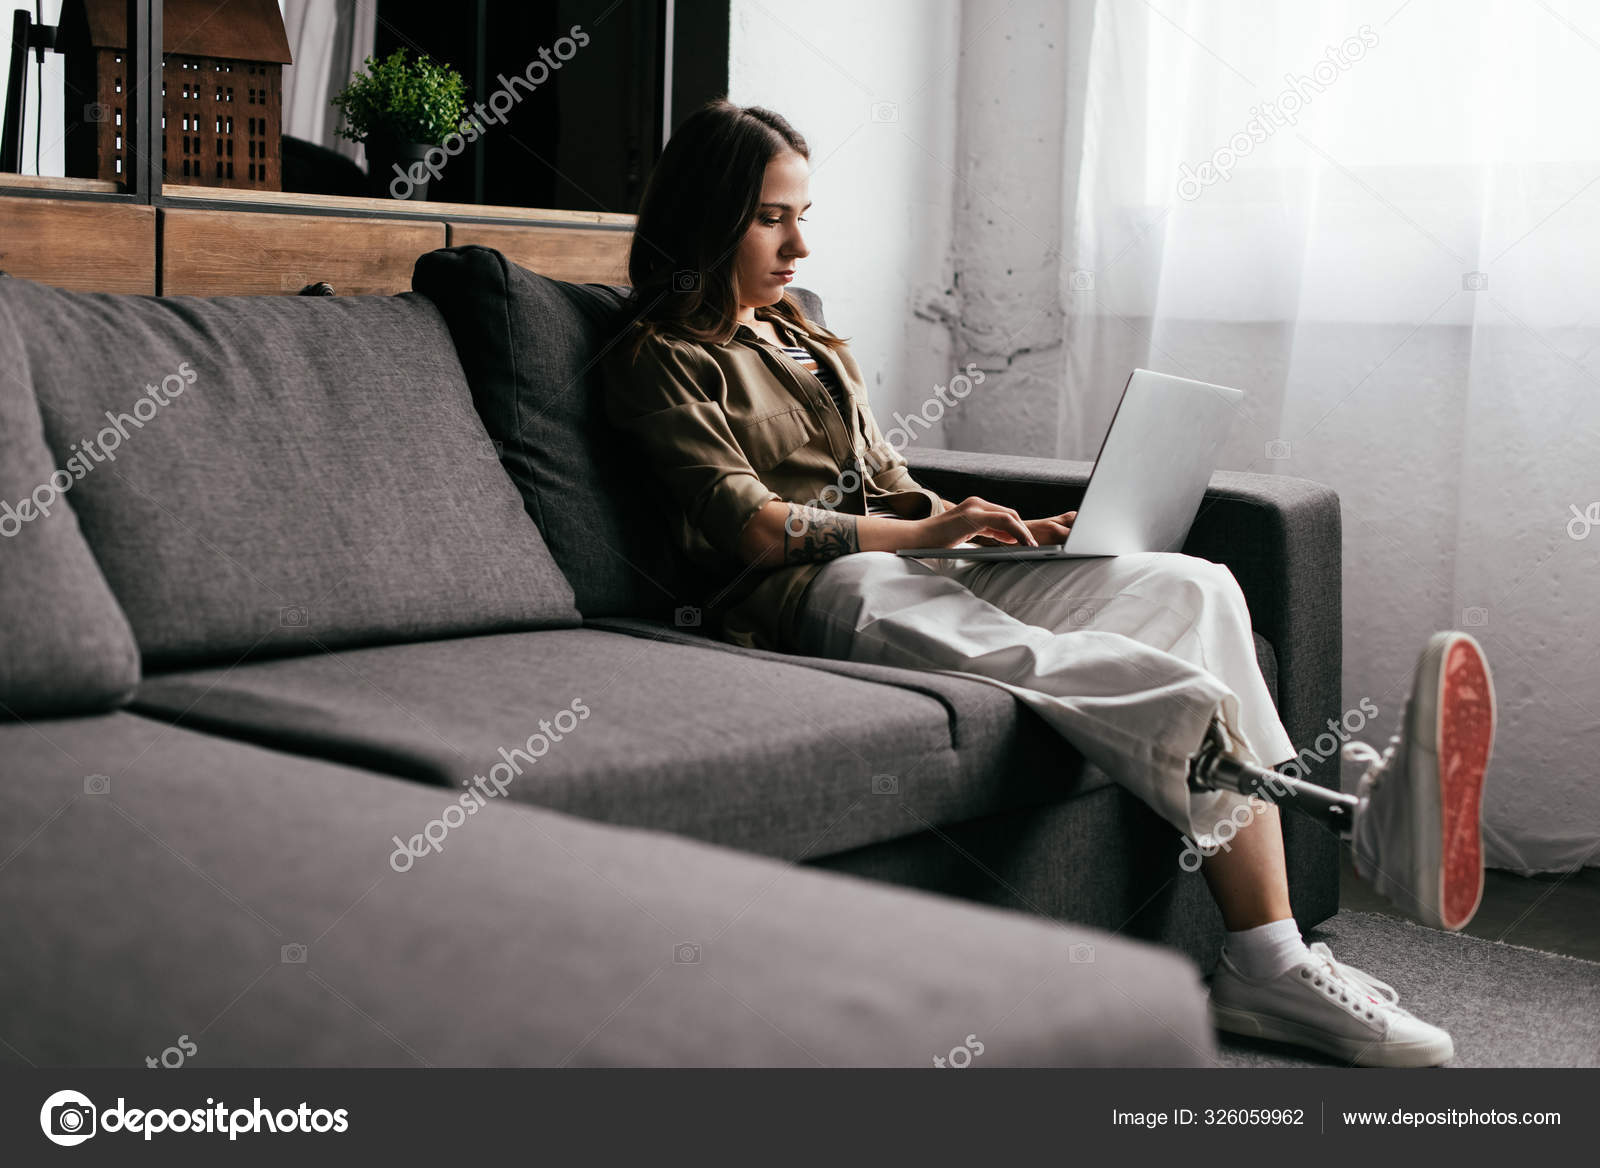 Smiling Young Woman With Prosthetic Leg Using Laptop In Living